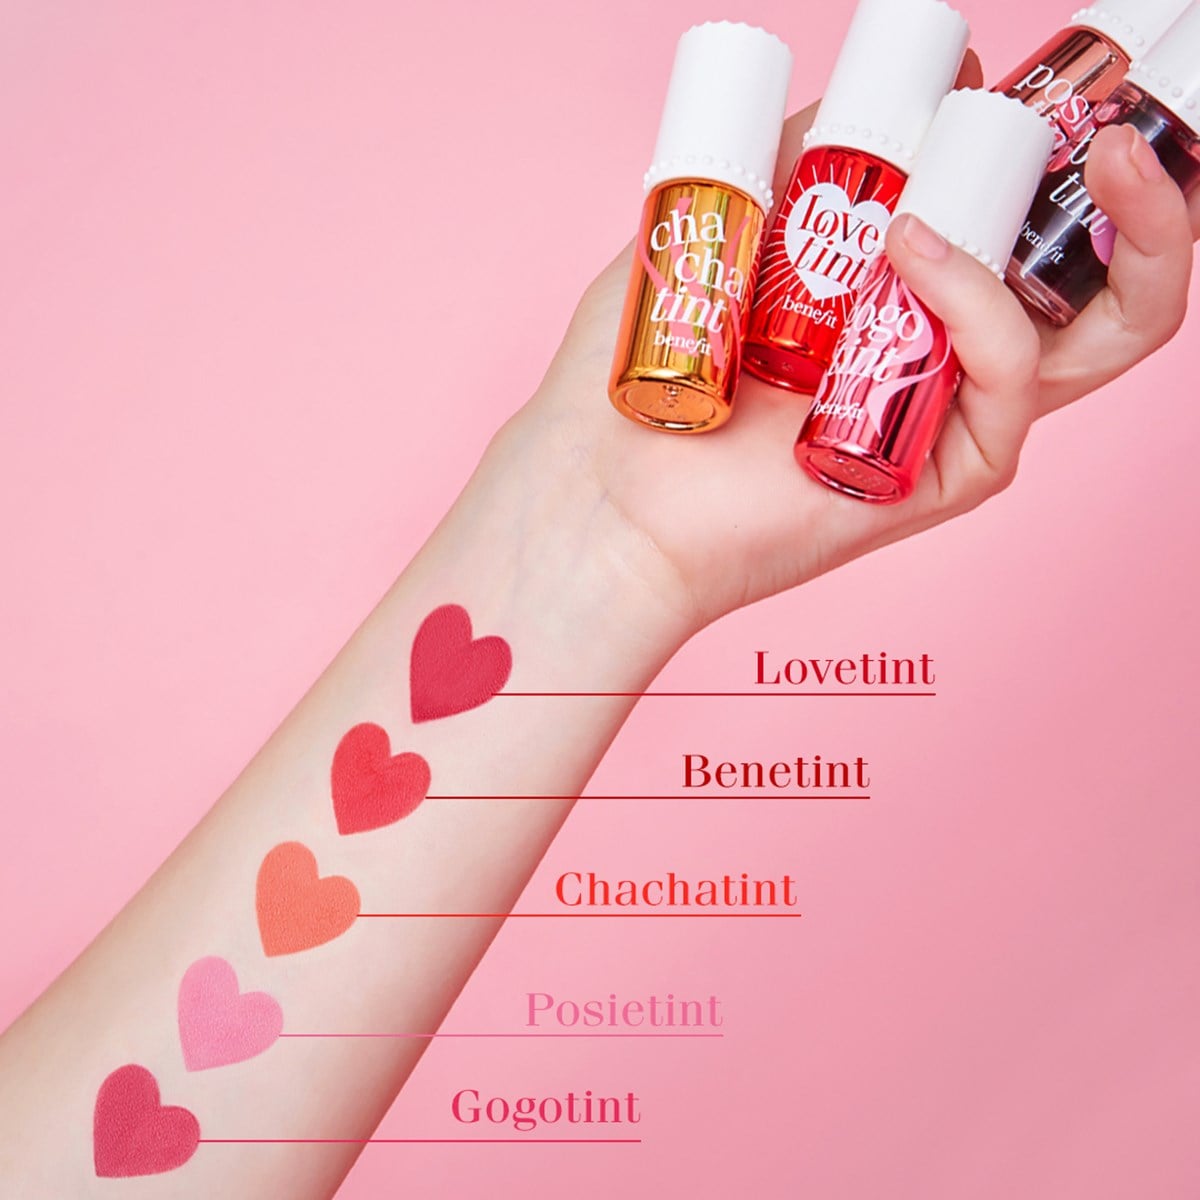 Lovetint Cheek & Lip Stain Fiery-red tinted lip & cheek stain by Benefit